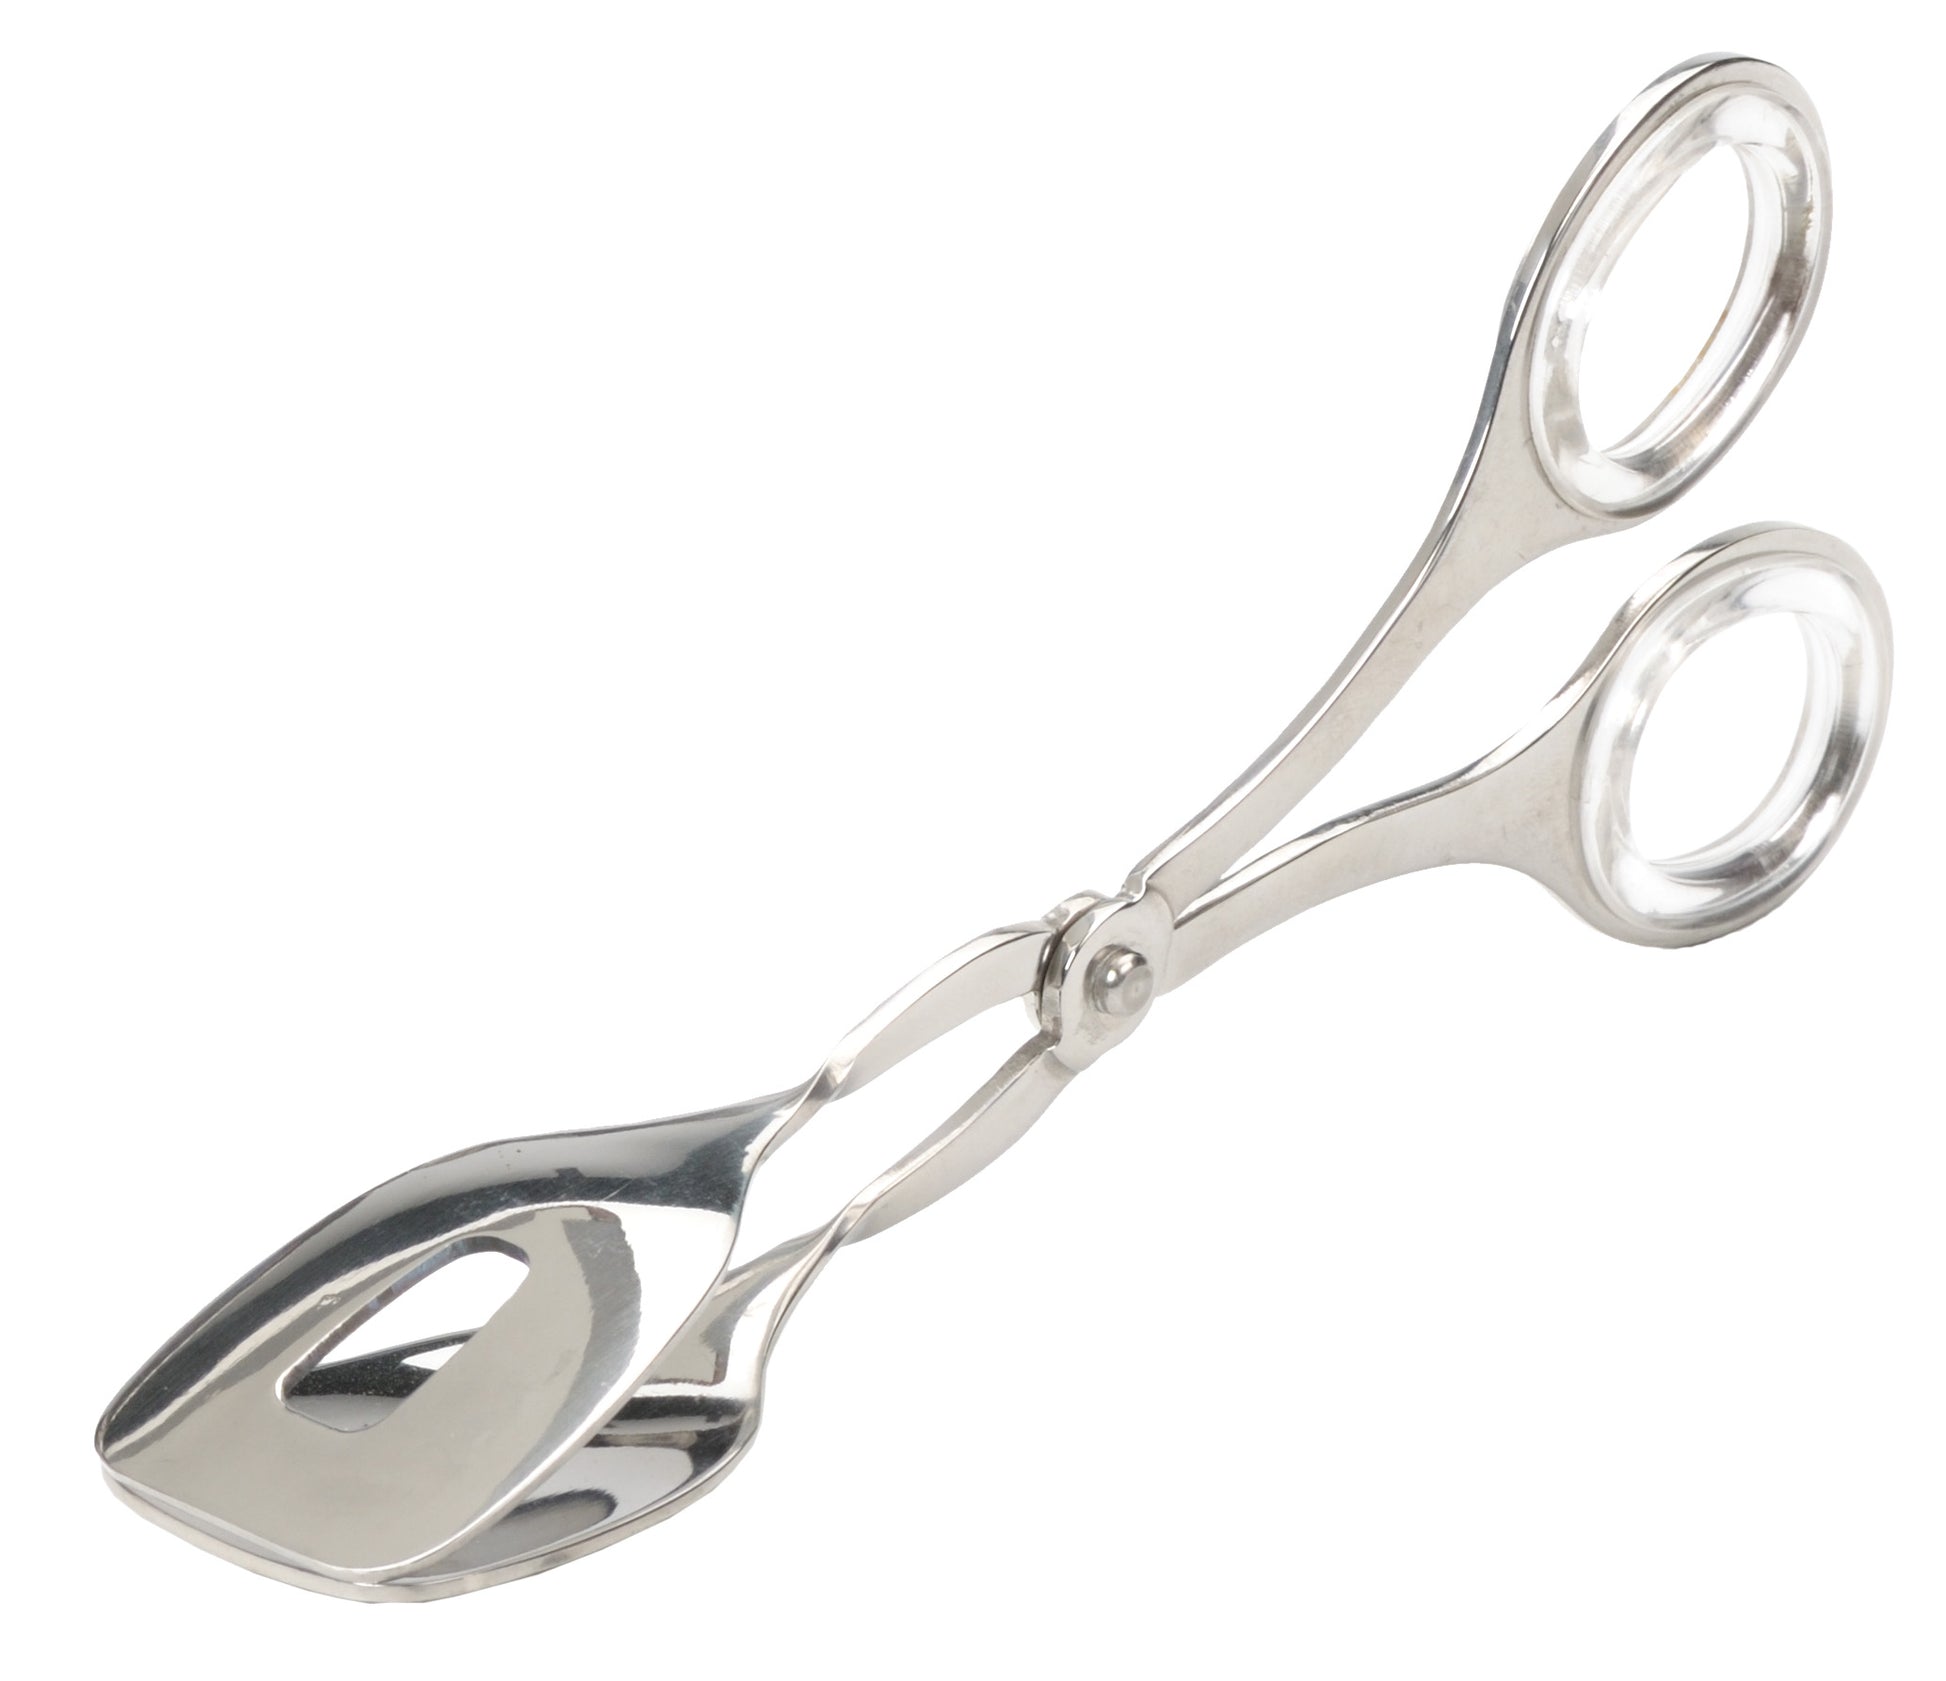 stainless steel tongs on white background.